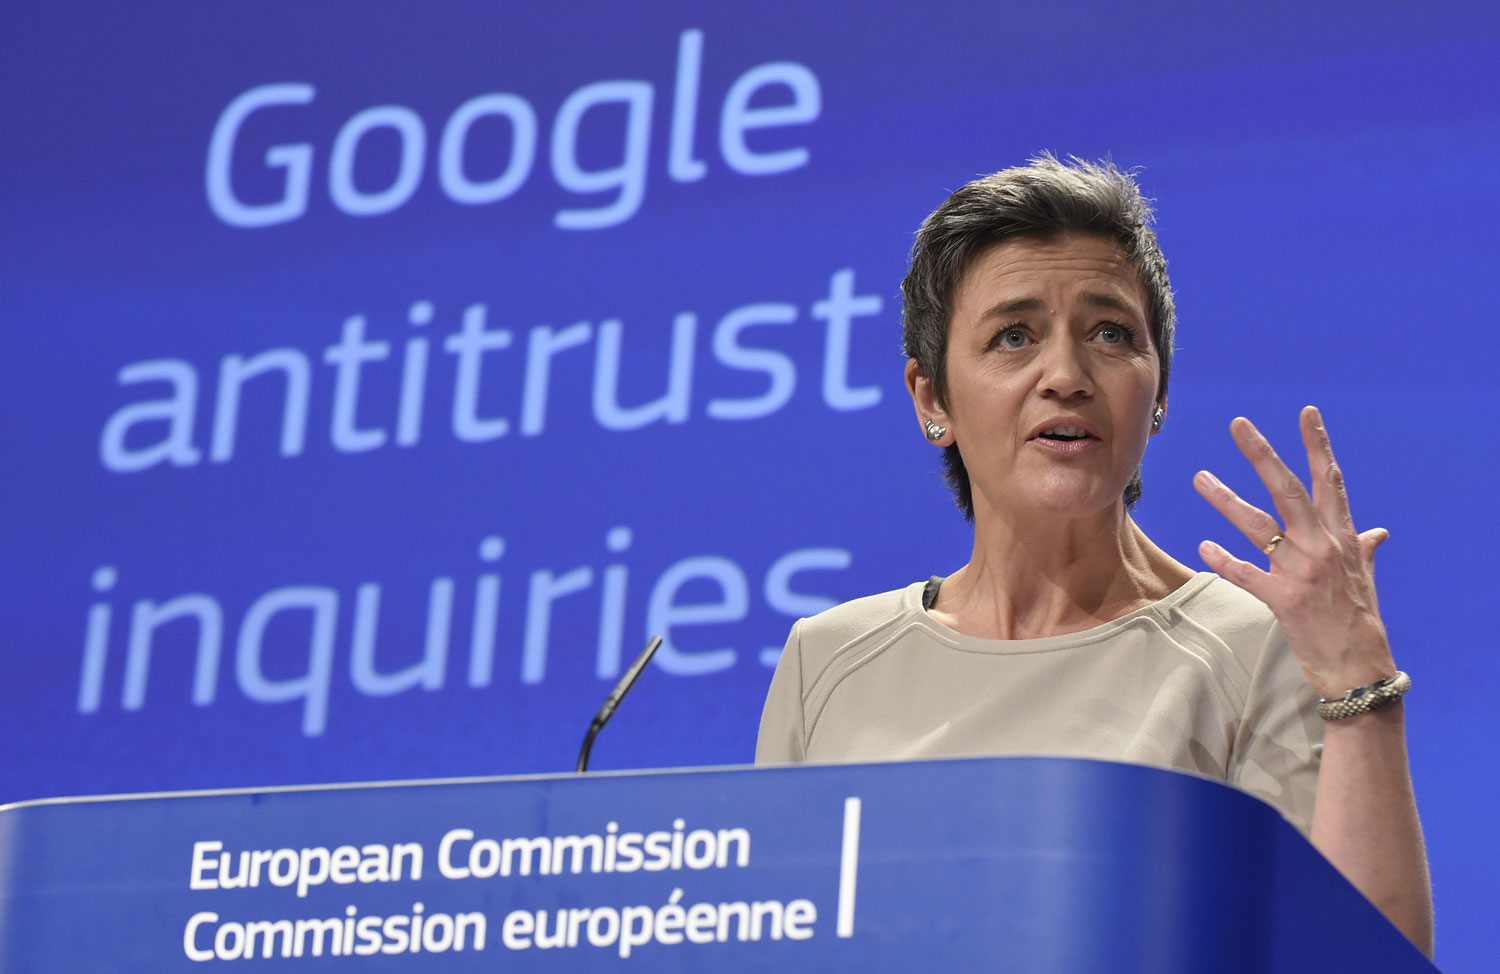 EU's new rules for Big Tech will come into force in Spring 2023, says  Vestager | TechCrunch